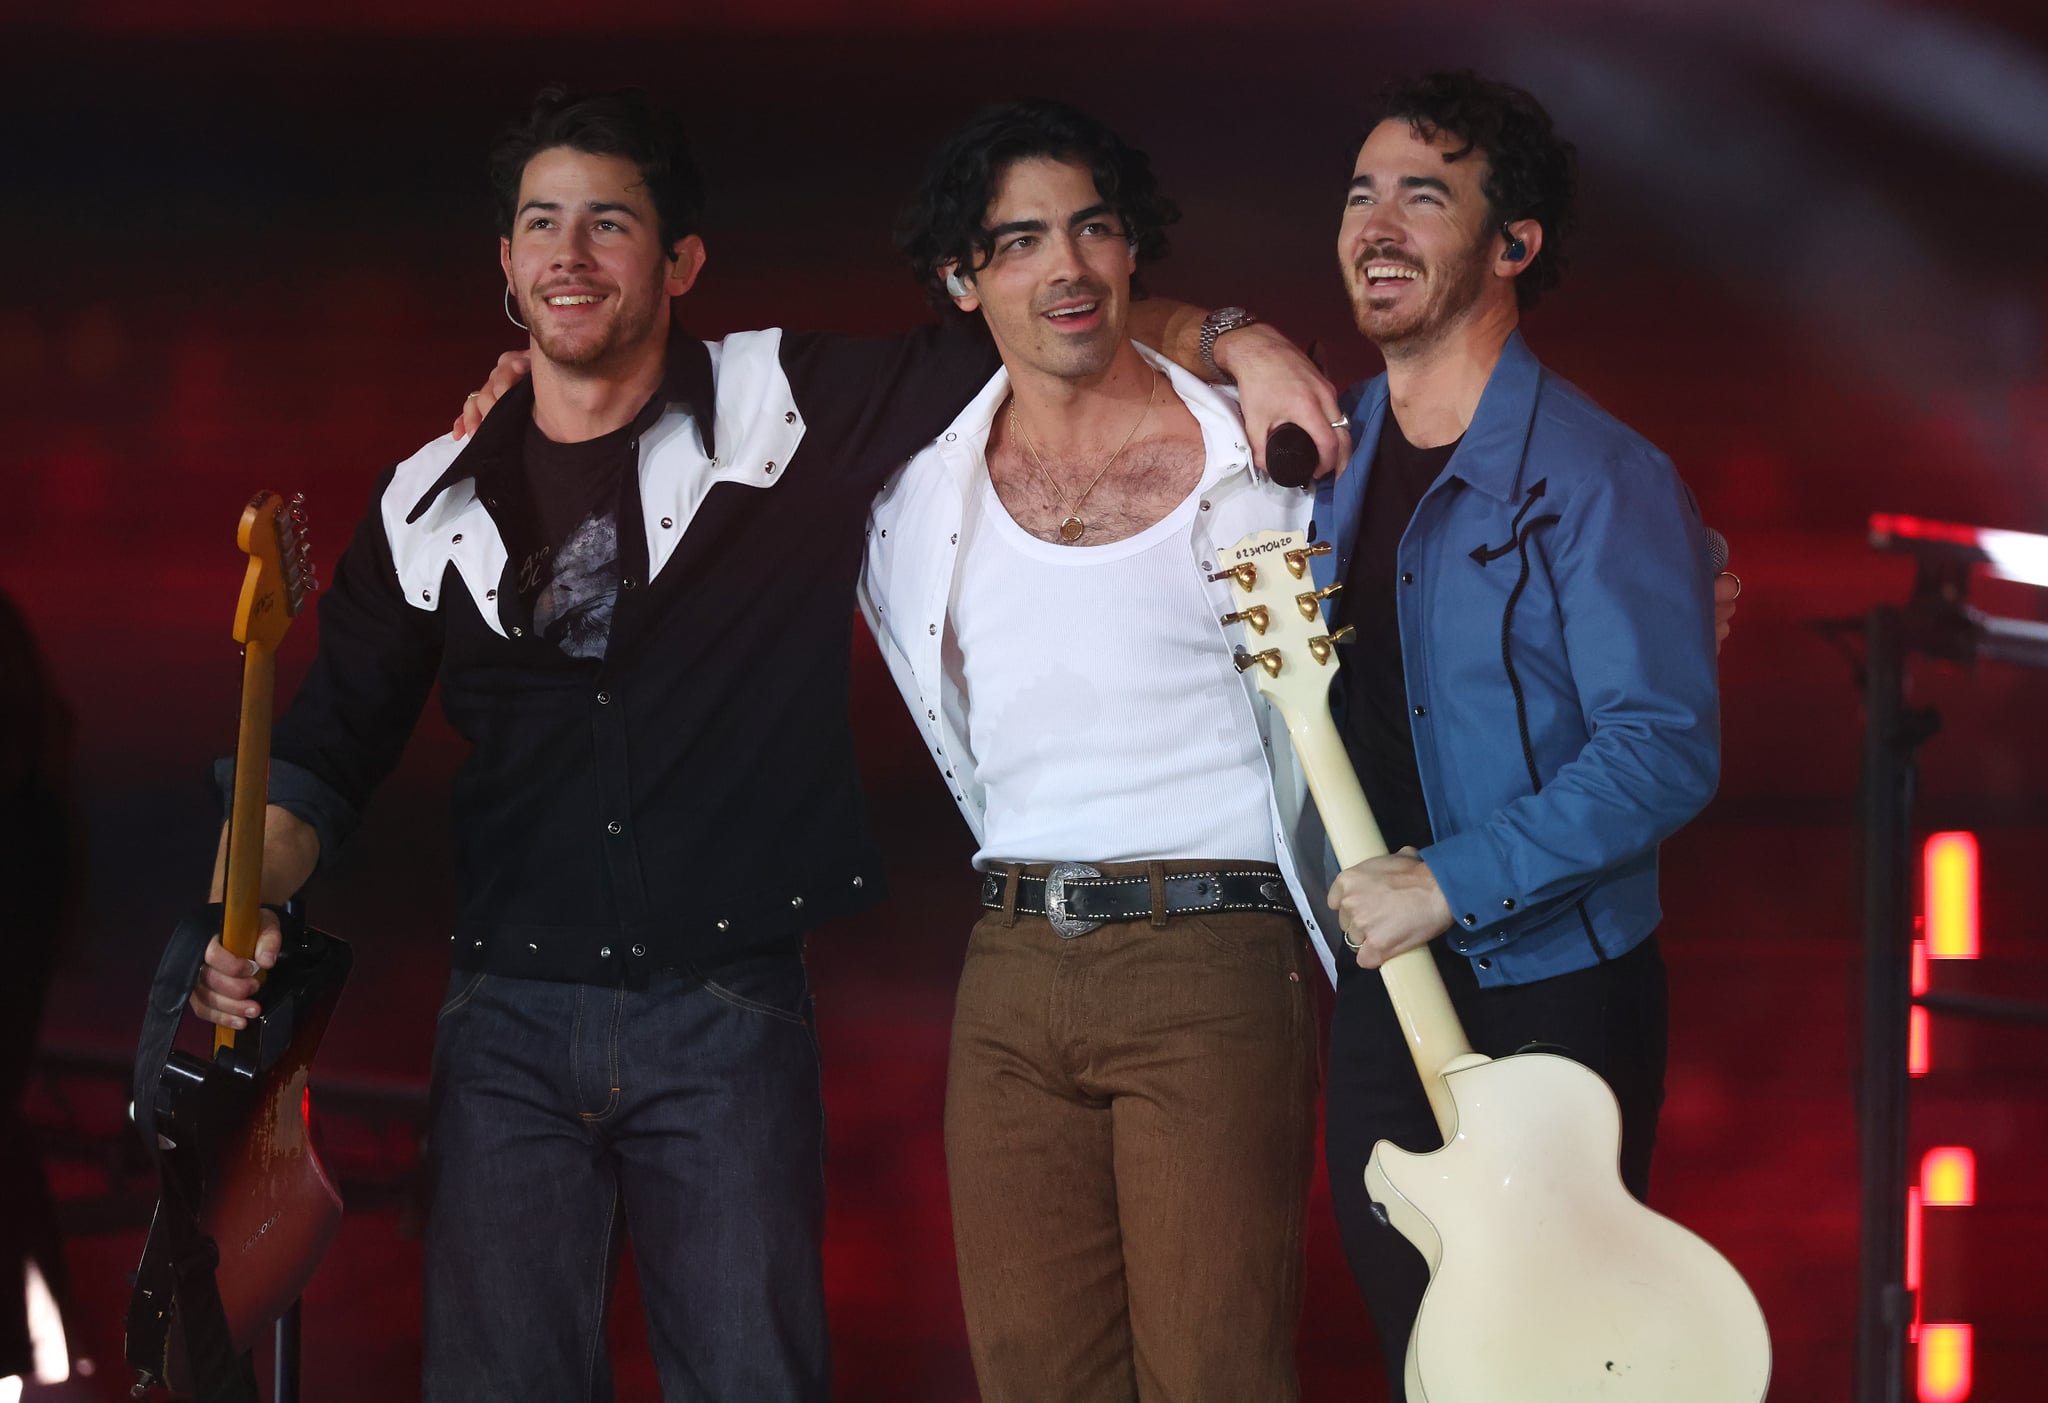 ARLINGTON, TEXAS - NOVEMBER 24: Nick Jonas, Joe Jonas, and Kevin Jonas of the Jonas Brothers perform in the halftime show during the game between the Dallas Cowboys and the New York Giants at AT&T Stadium on 24 November, 2022 in Arlington, Texas.  (Photo by Richard Rodriguez/Getty Images)